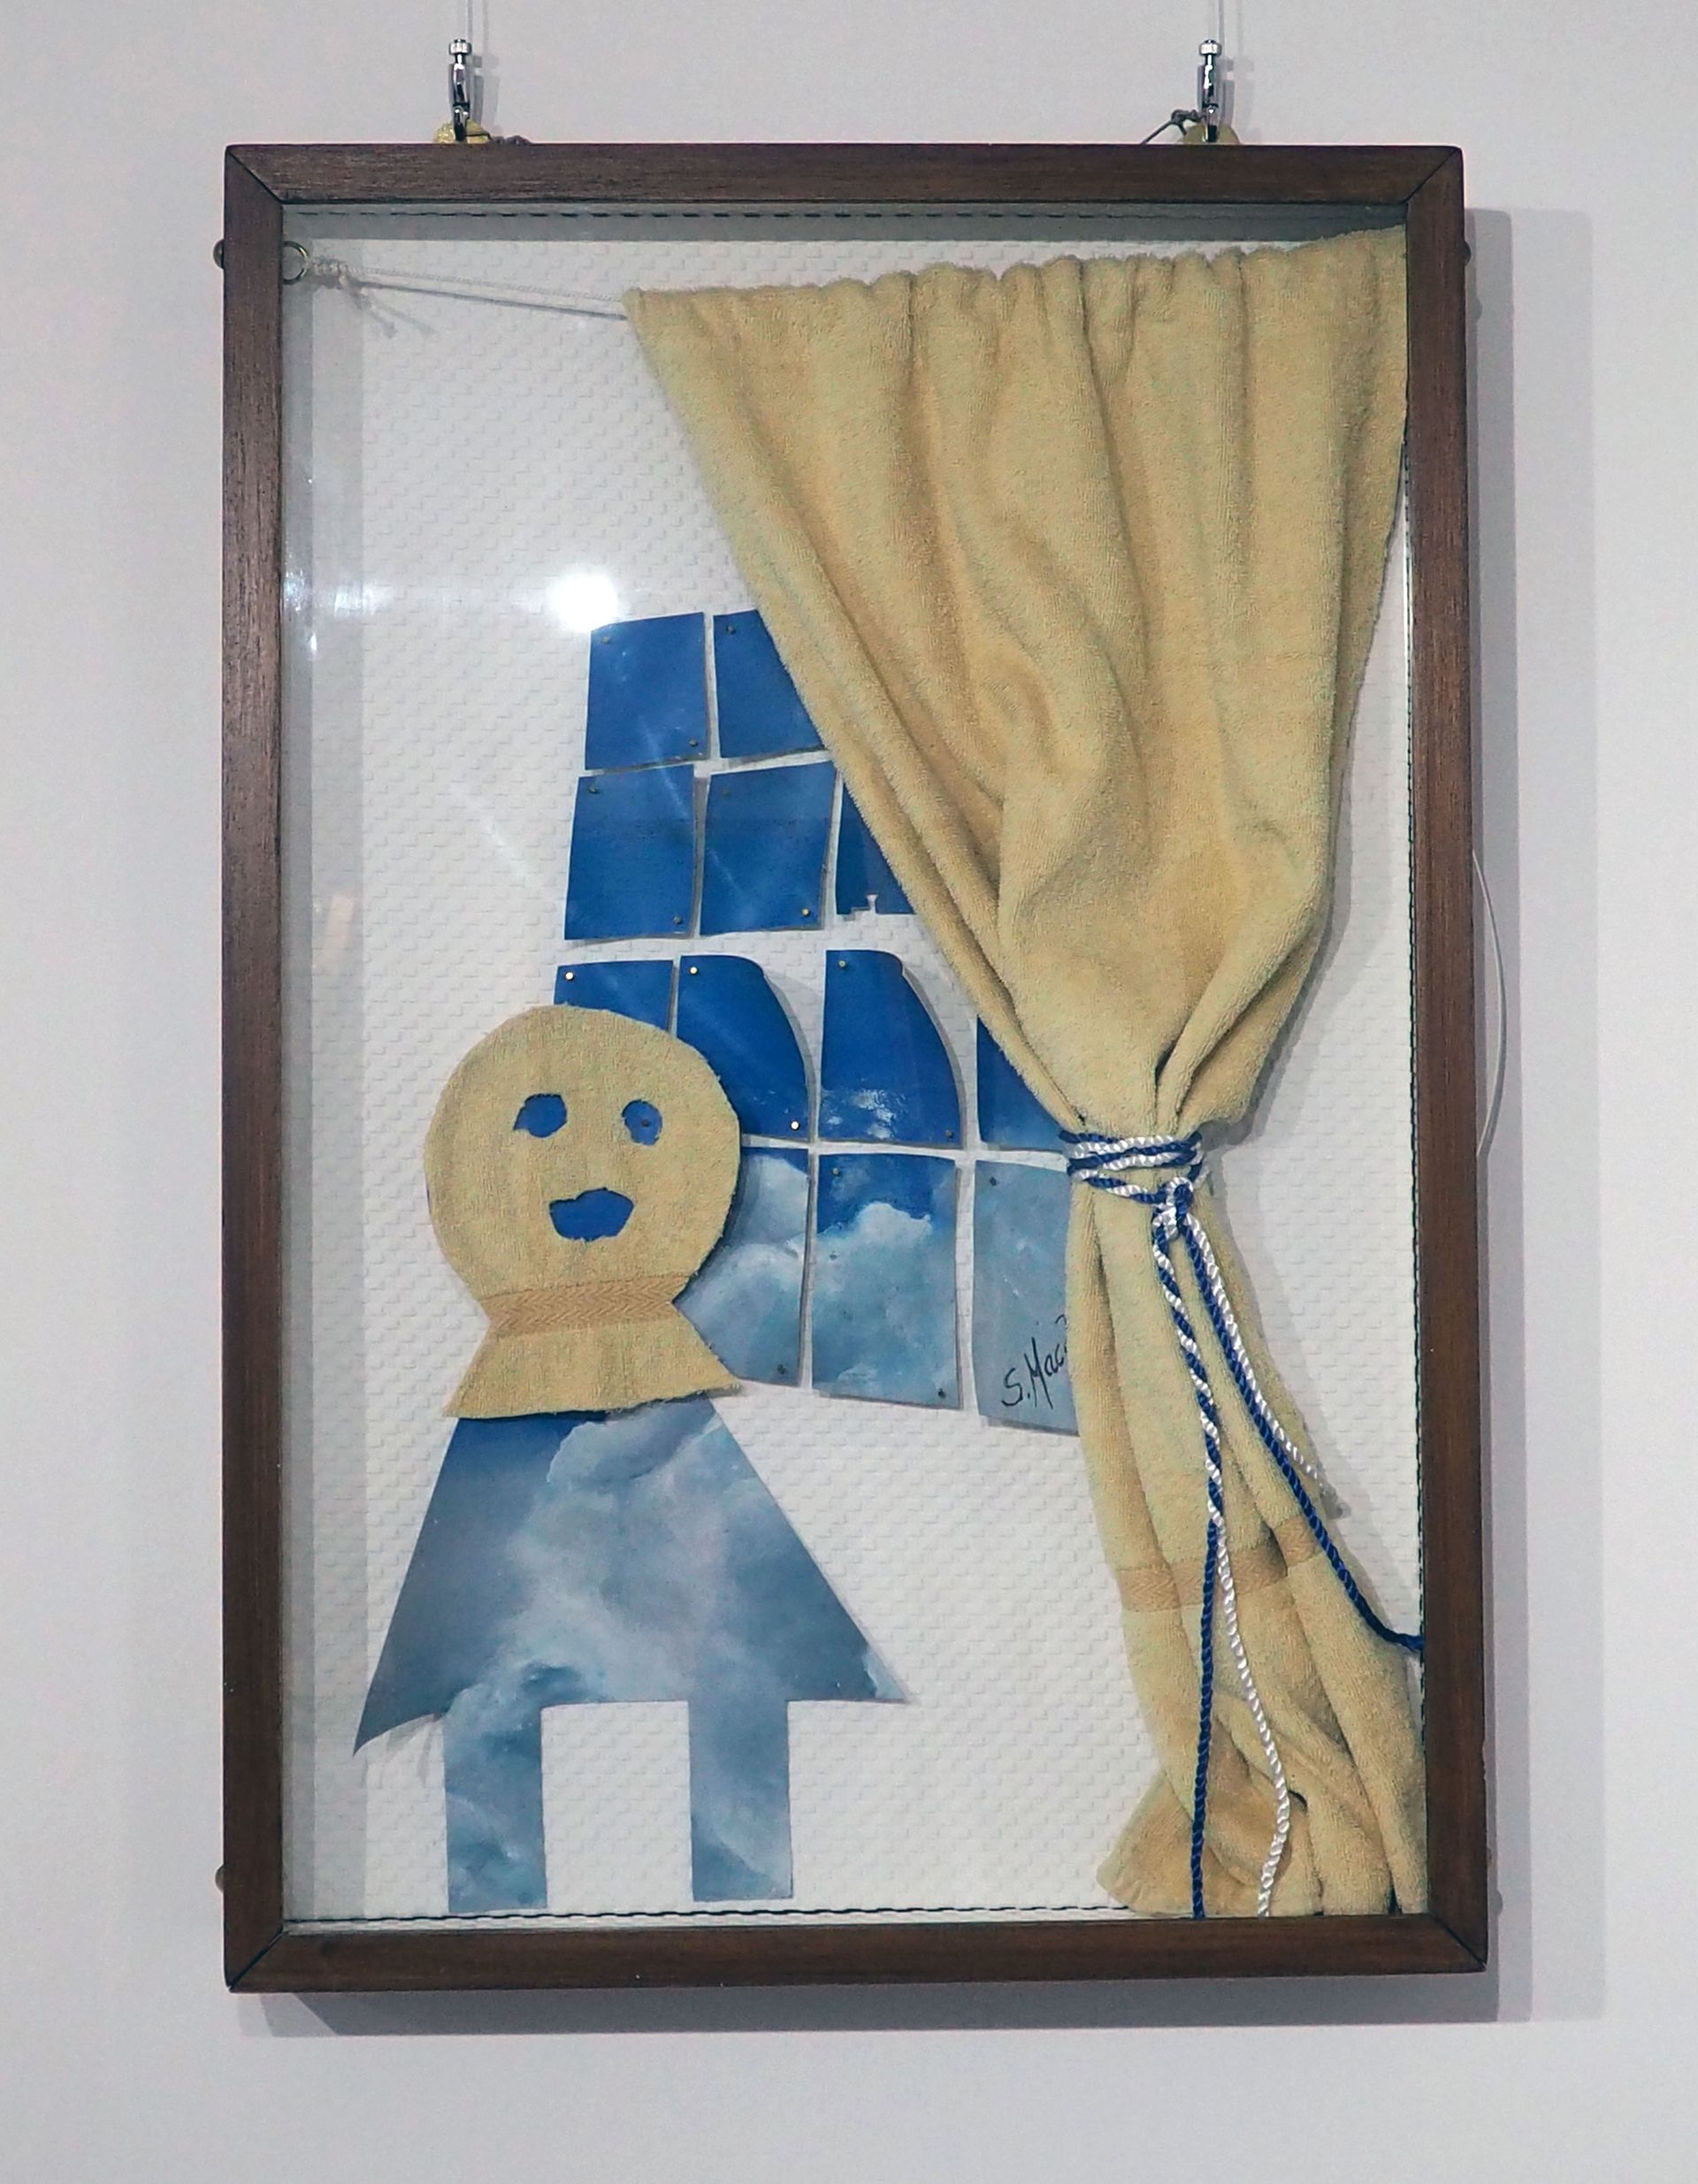 Installation made from towel, painted canvas shows a skirt shaped figure standing in front of a sash window. Like the figure the window is made from a cut up old oil painting of Sarah's the figure is wearing a mask (balclava) 